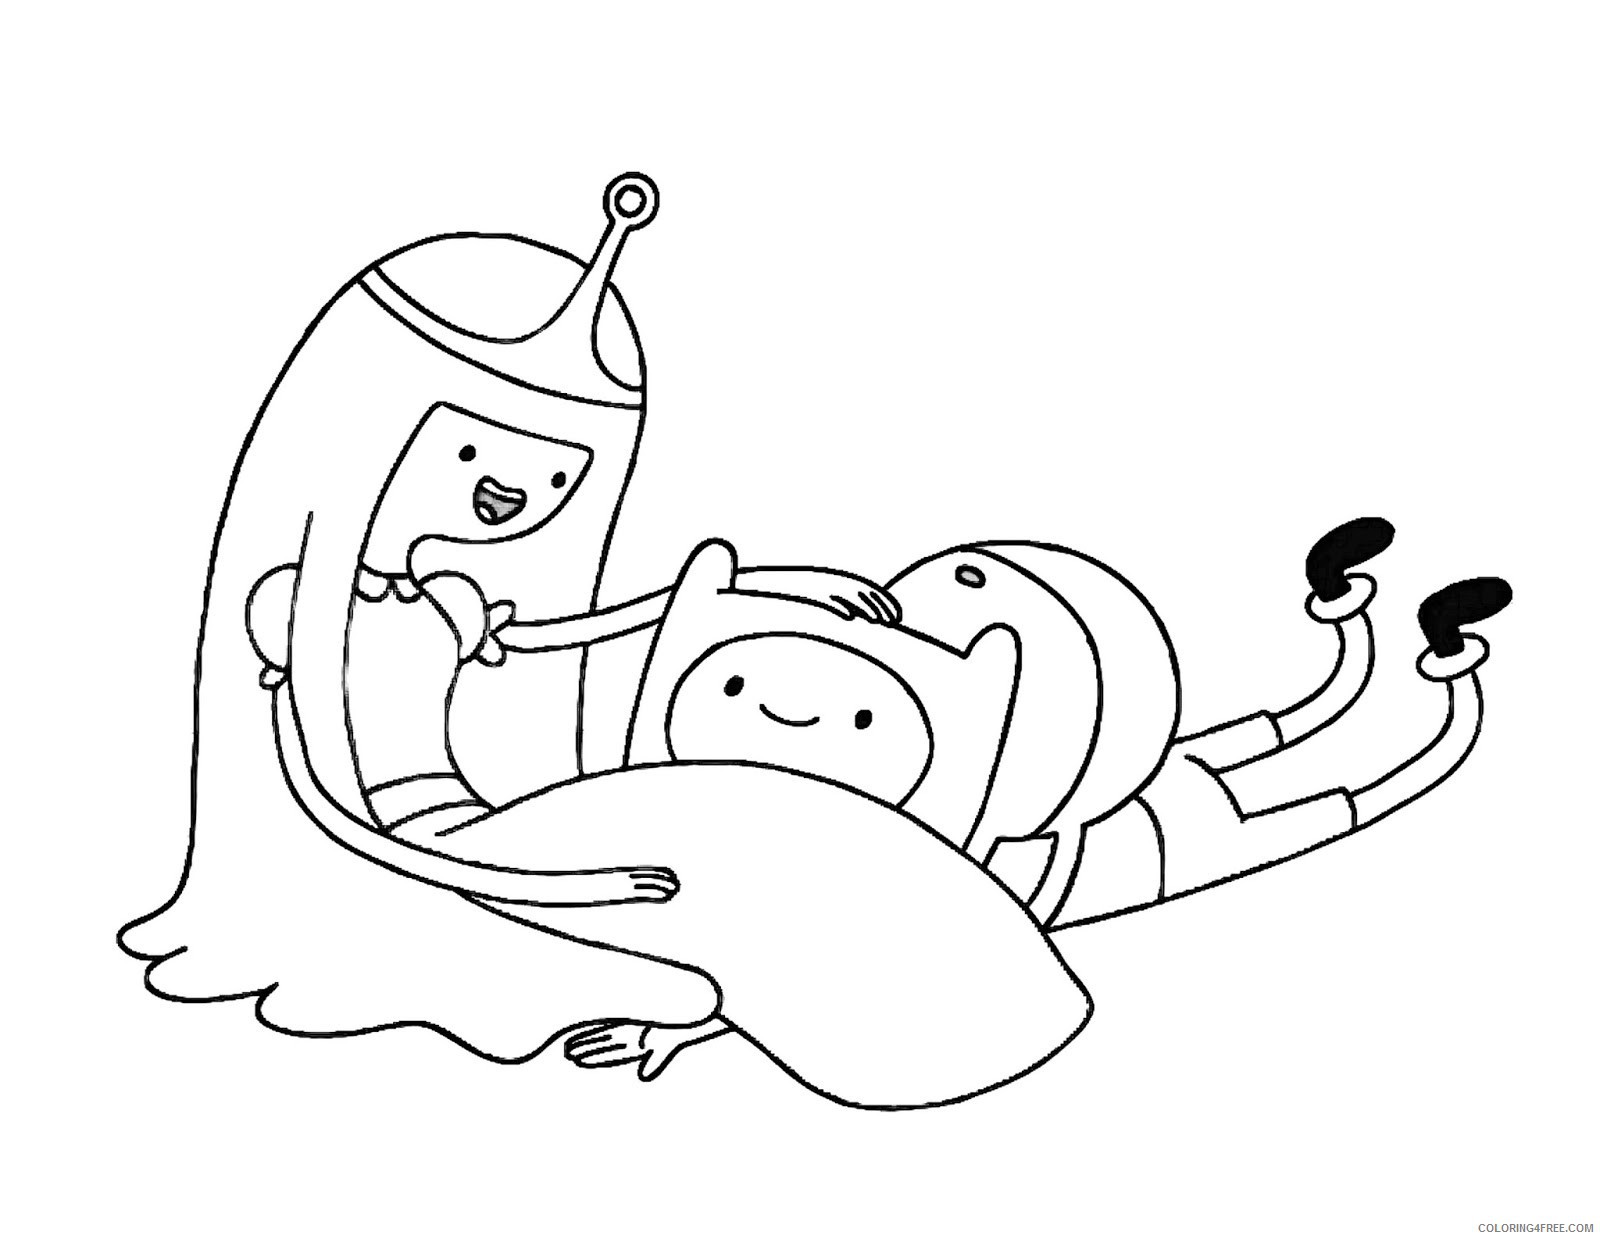 adventure time coloring pages princess bubblegum and finn Coloring4free